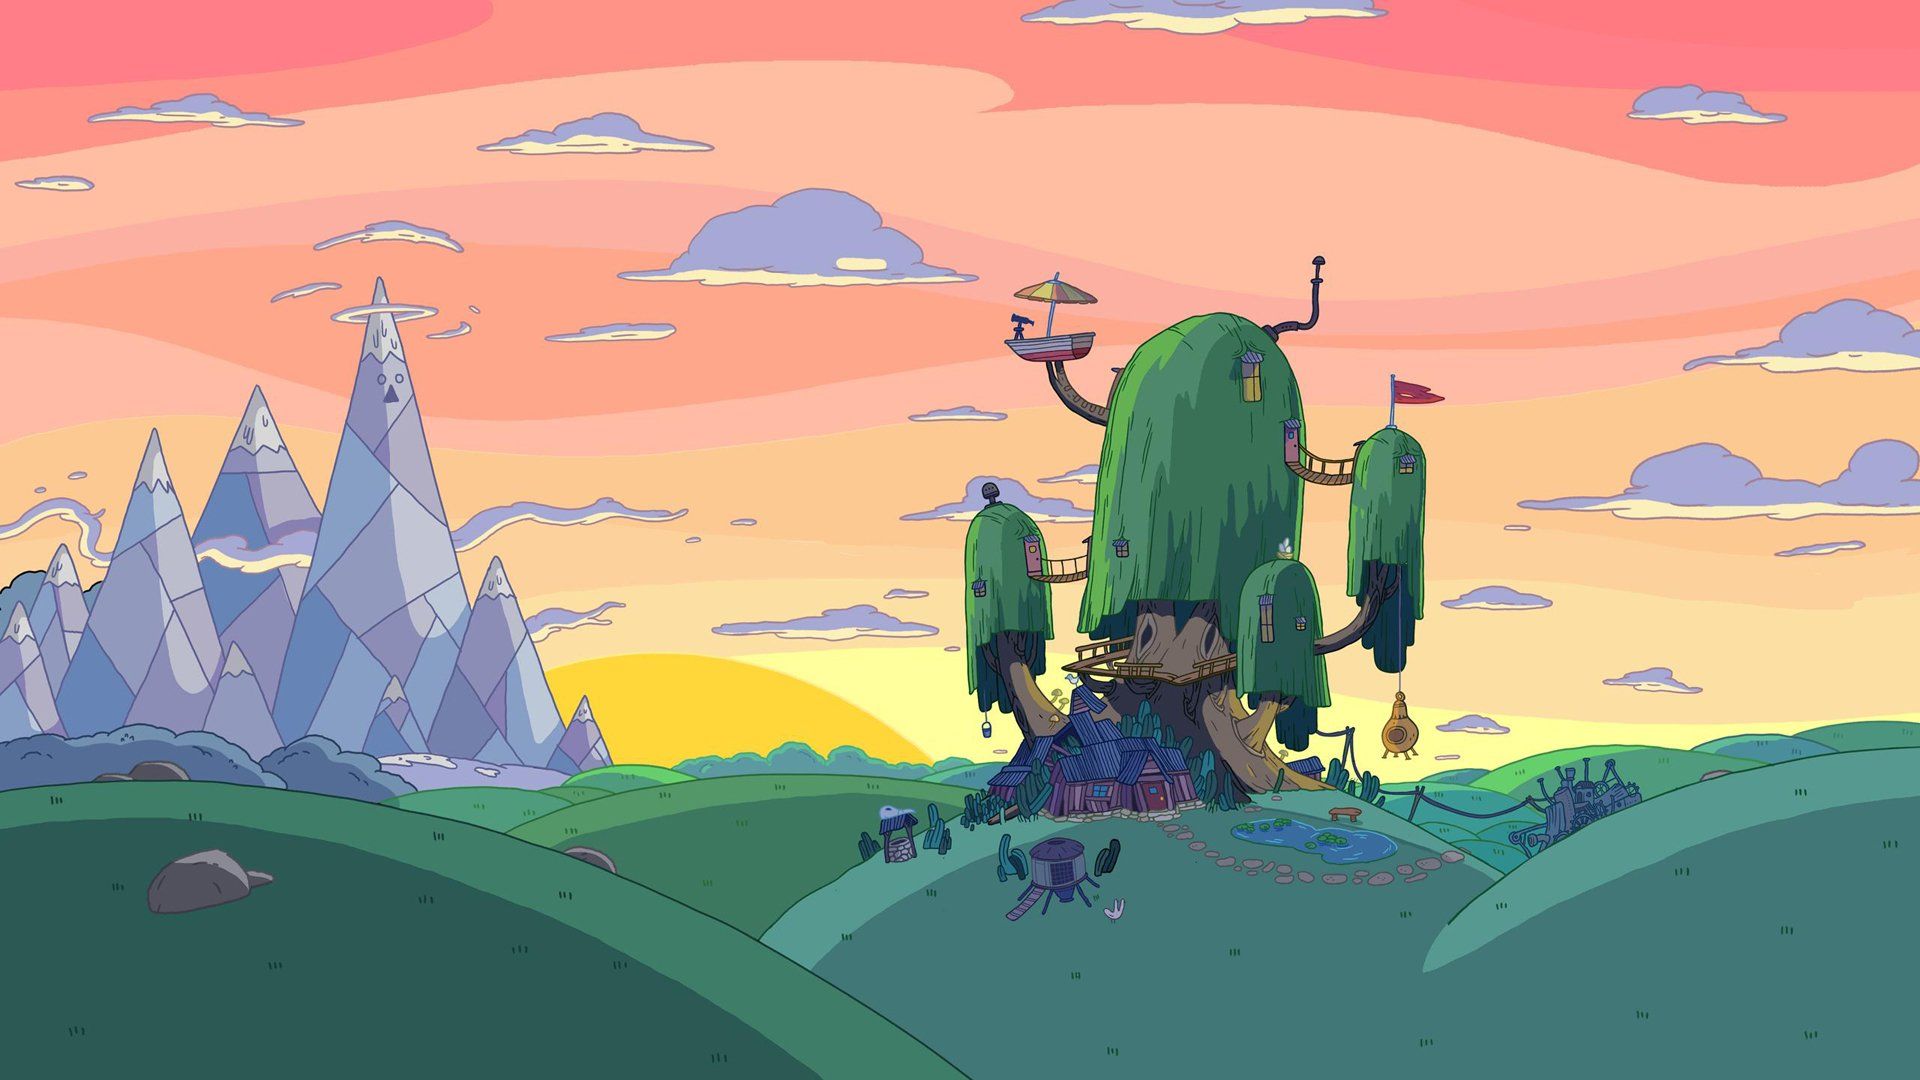 Adventure Time Background